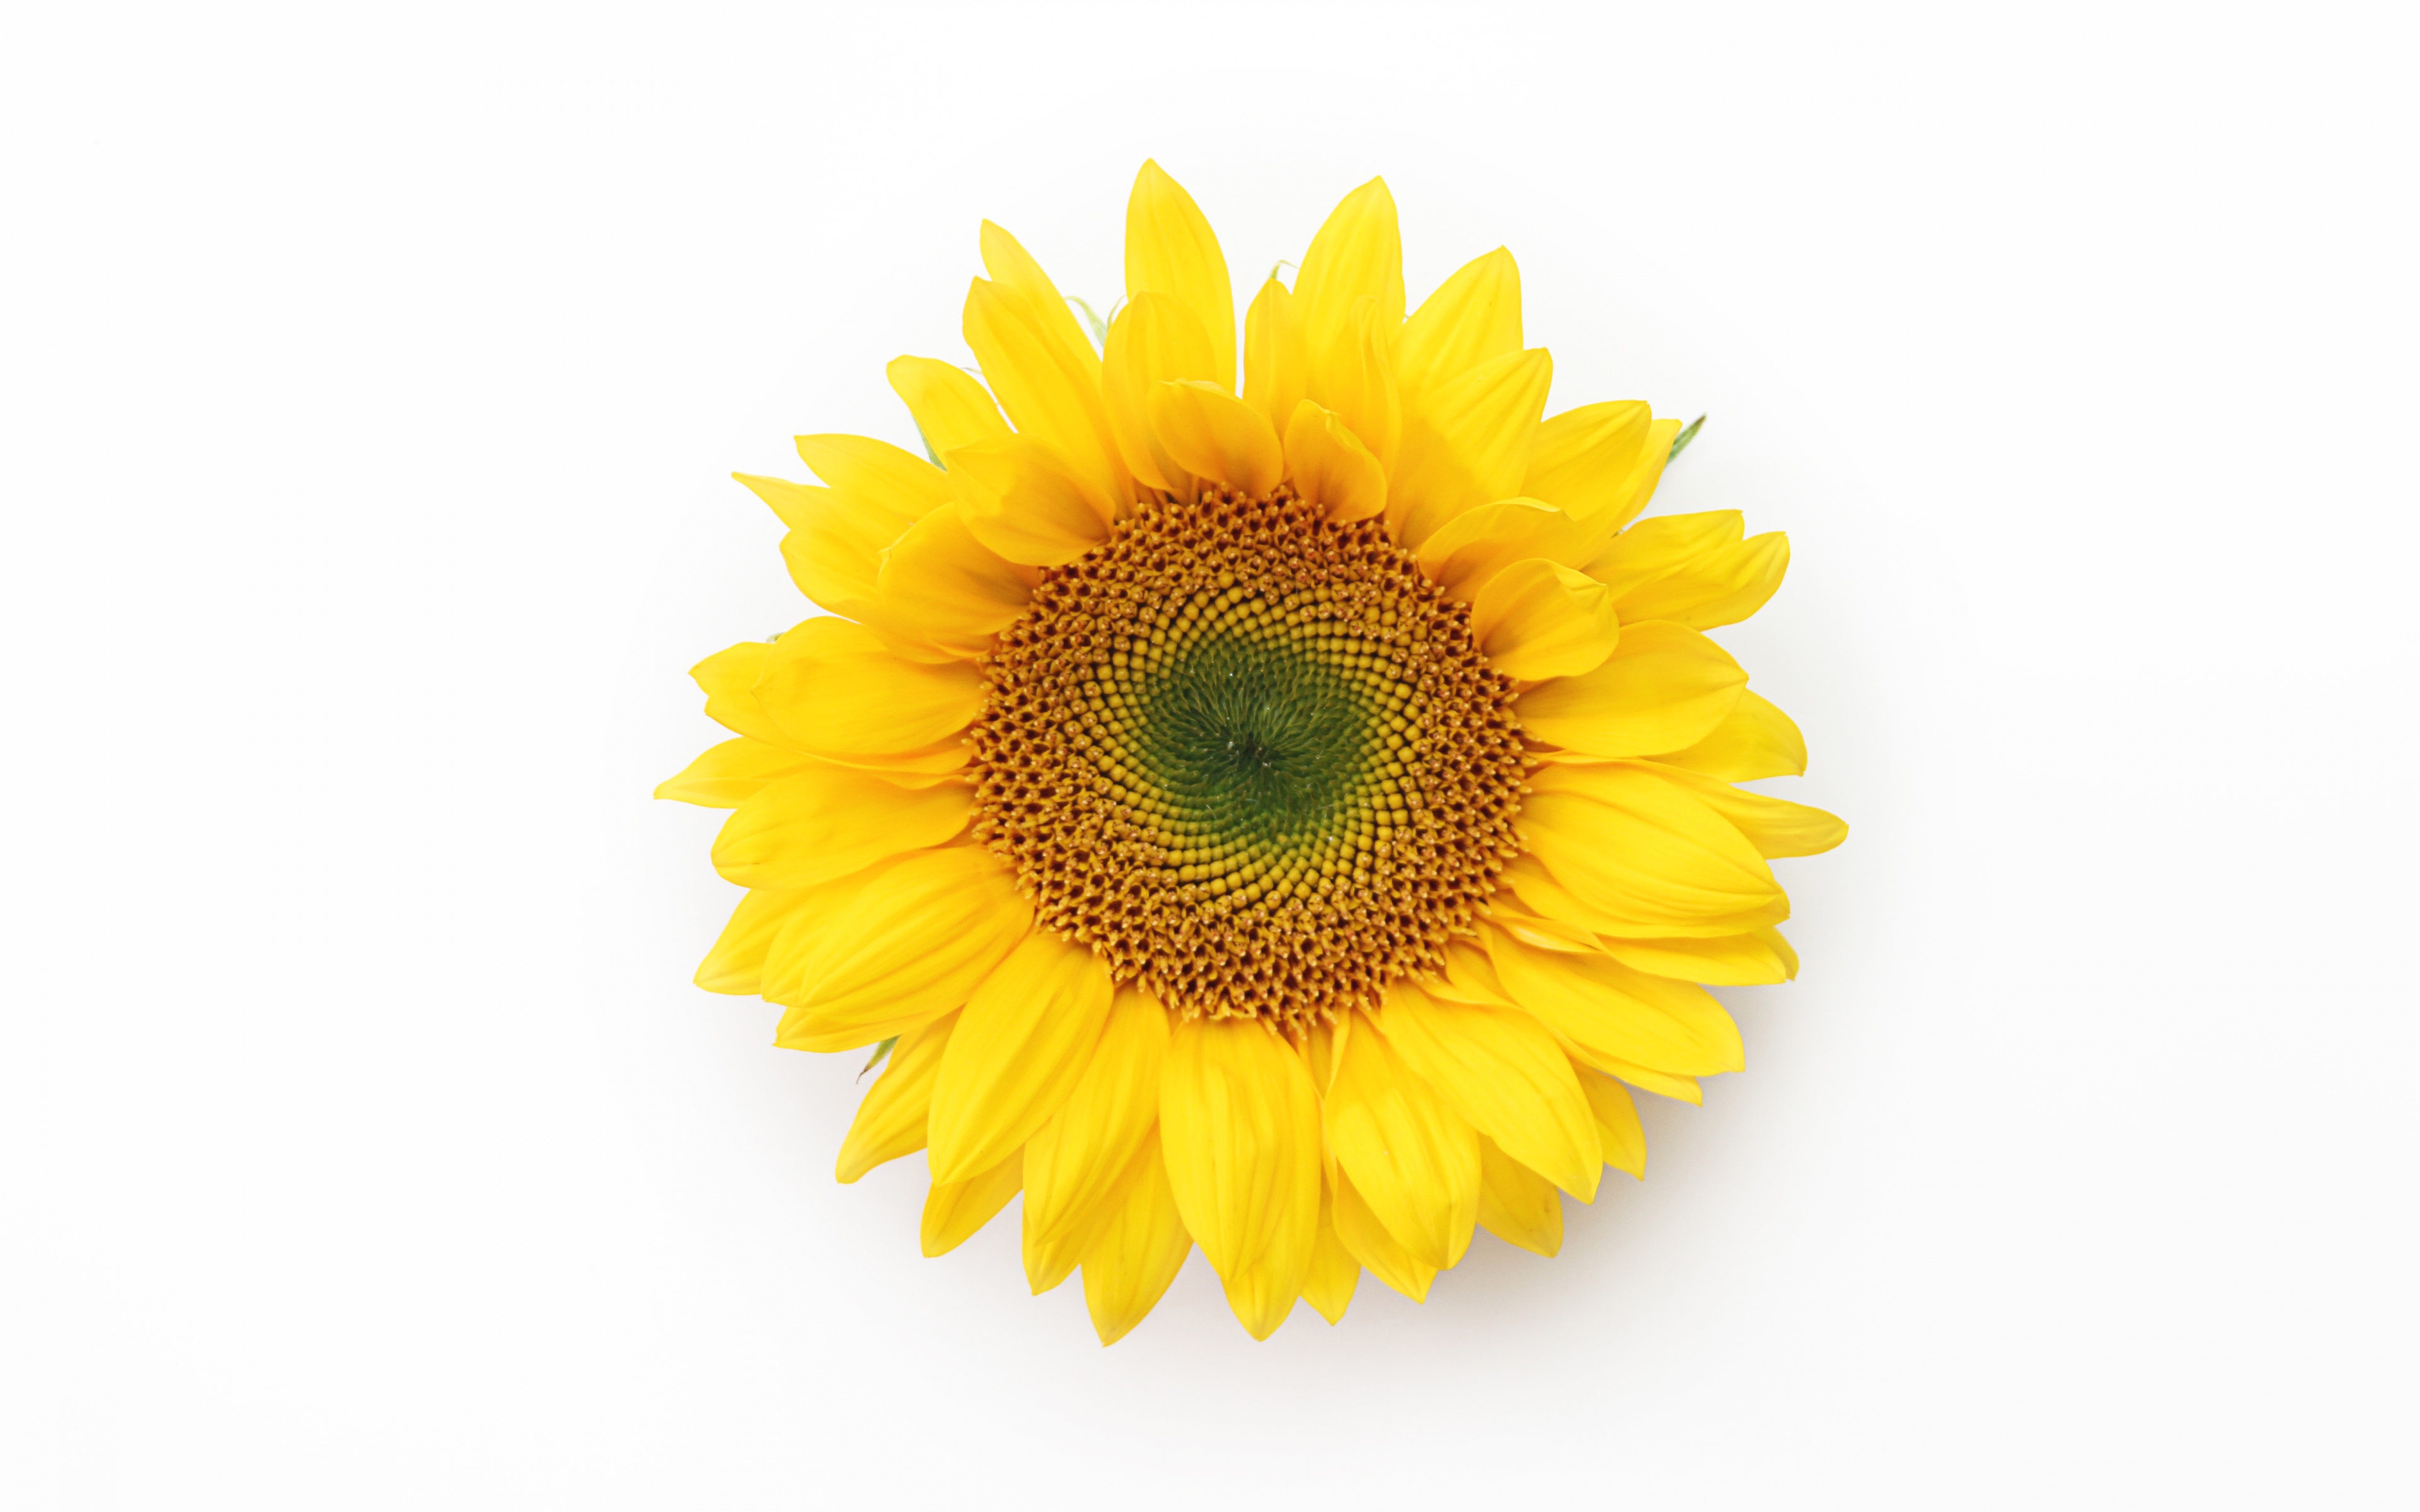 General 3840x2400 simple background white background minimalism flowers sunflowers plants yellow flowers